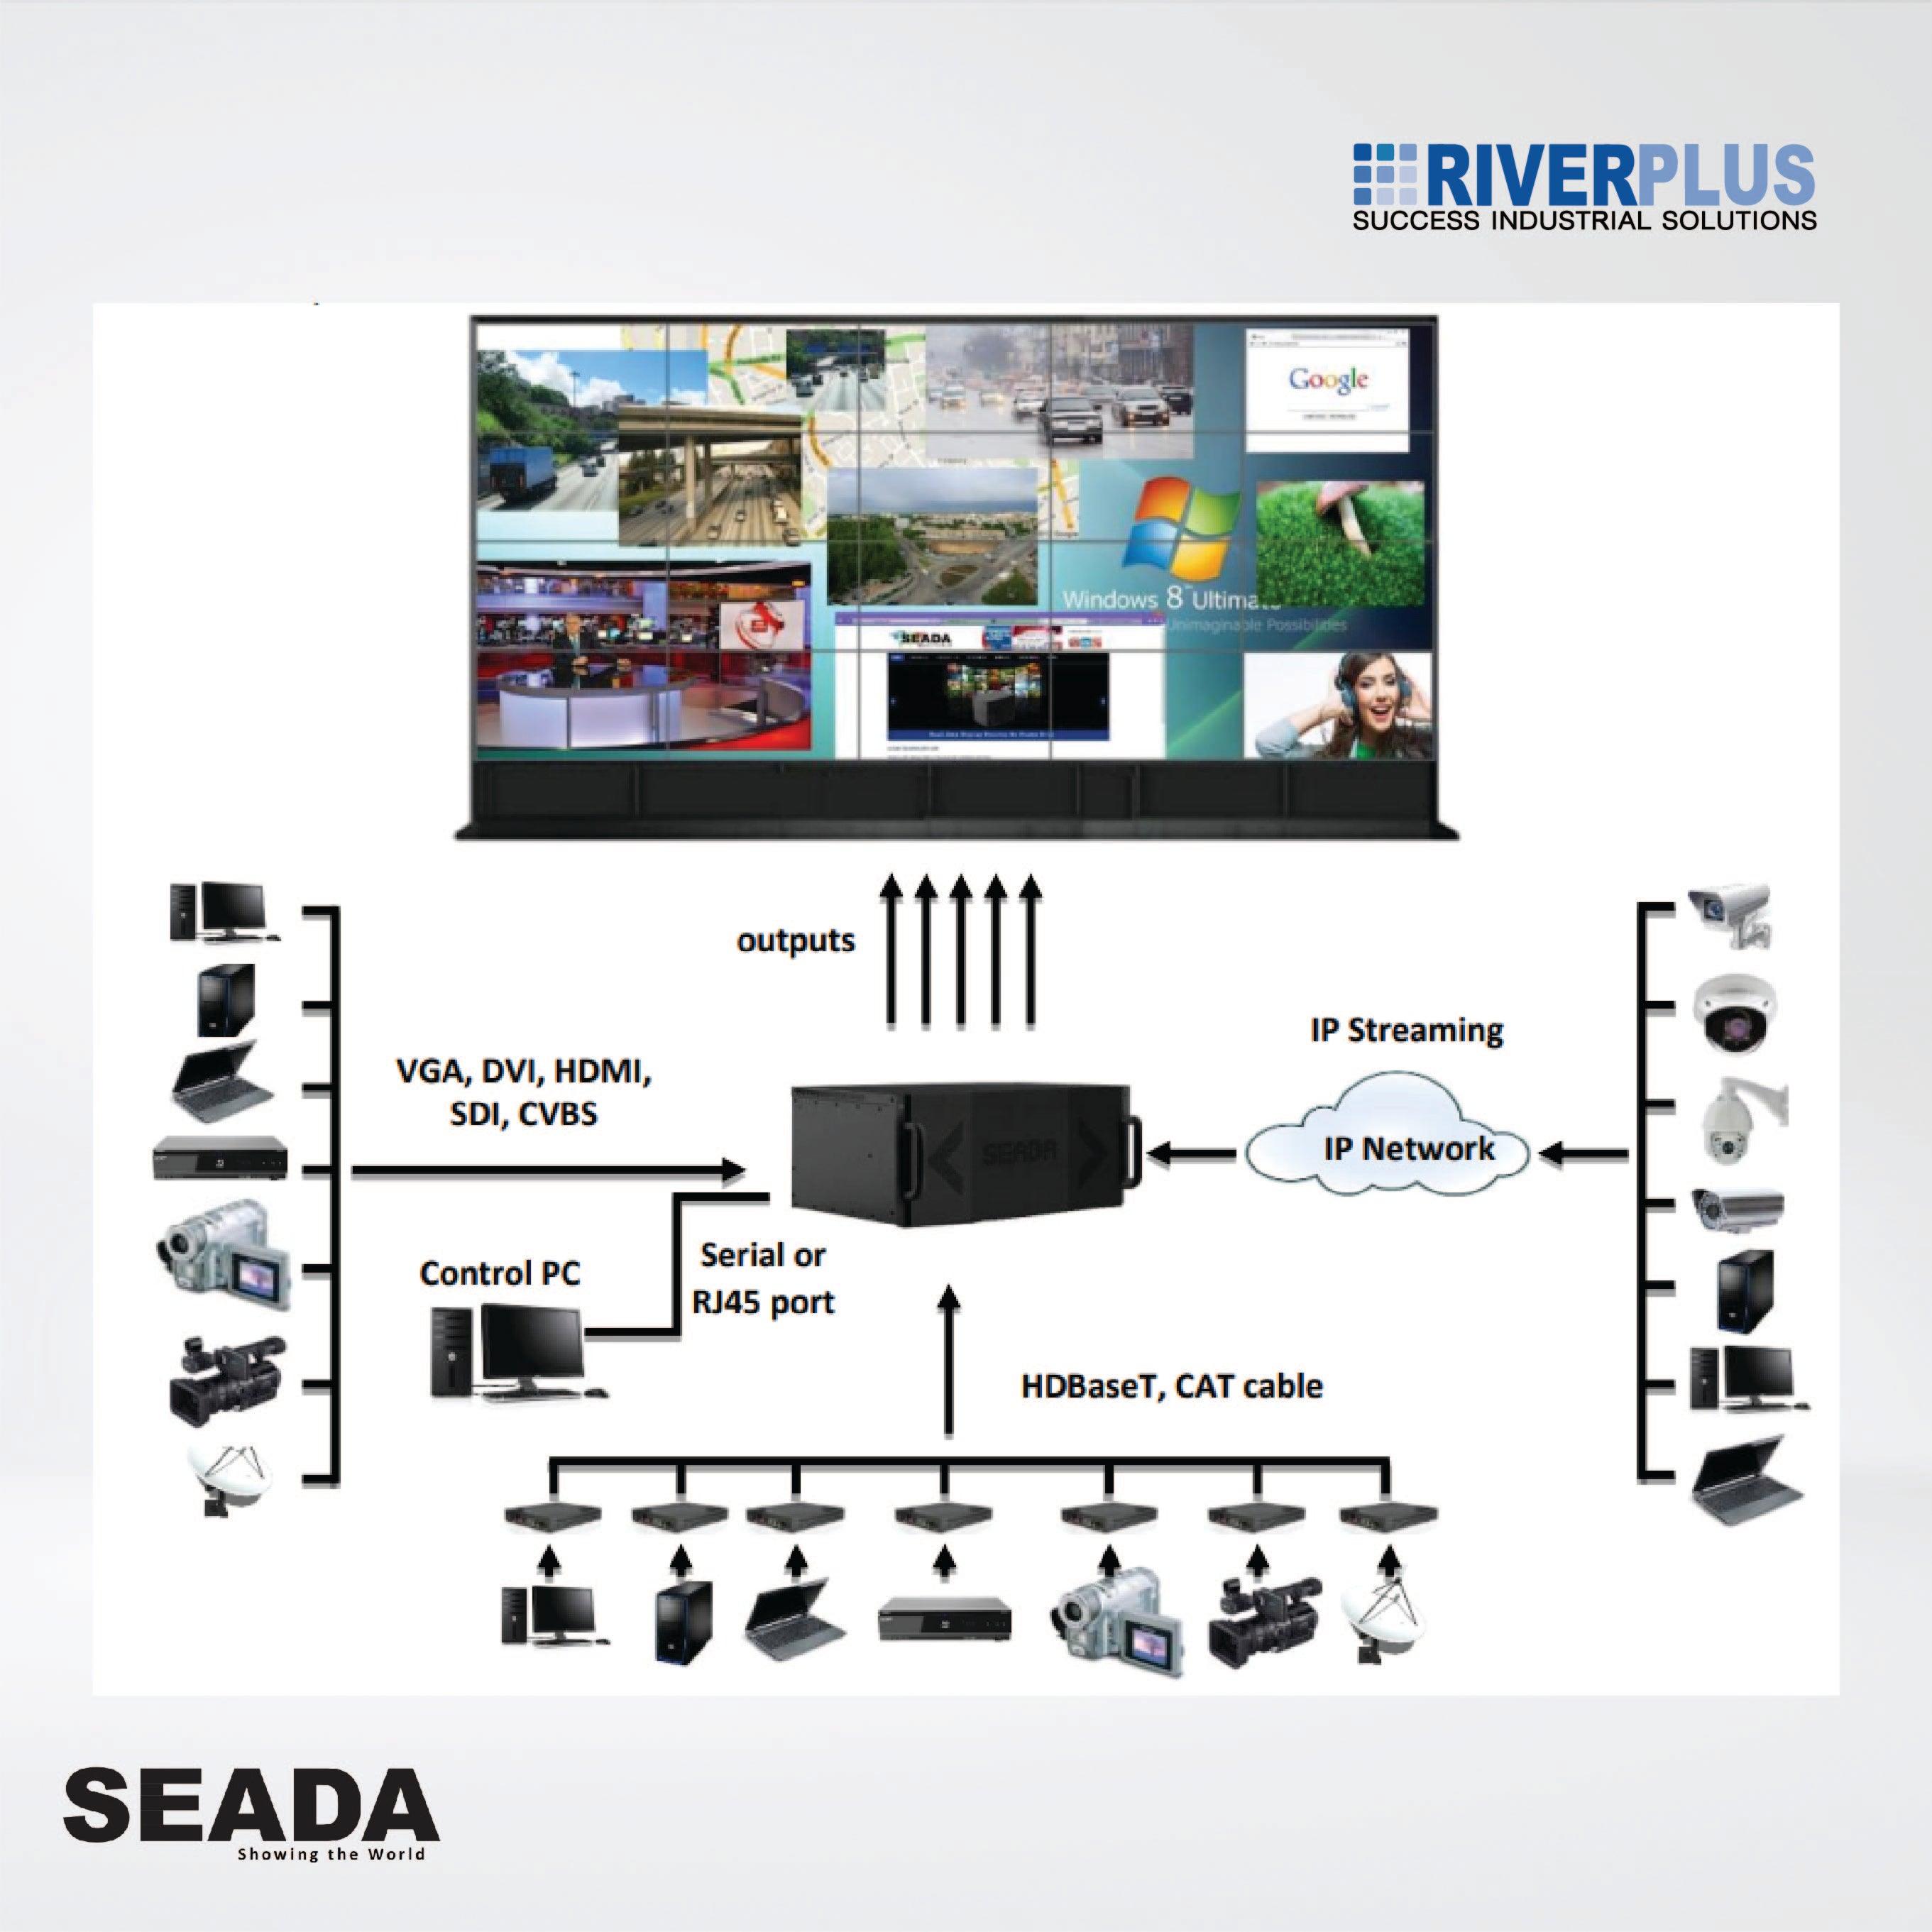 SWP28 CHASSIS 28U, 160 INPUT/160 OUTPUT ,Video wall controllers are the most Advanced solution - Riverplus